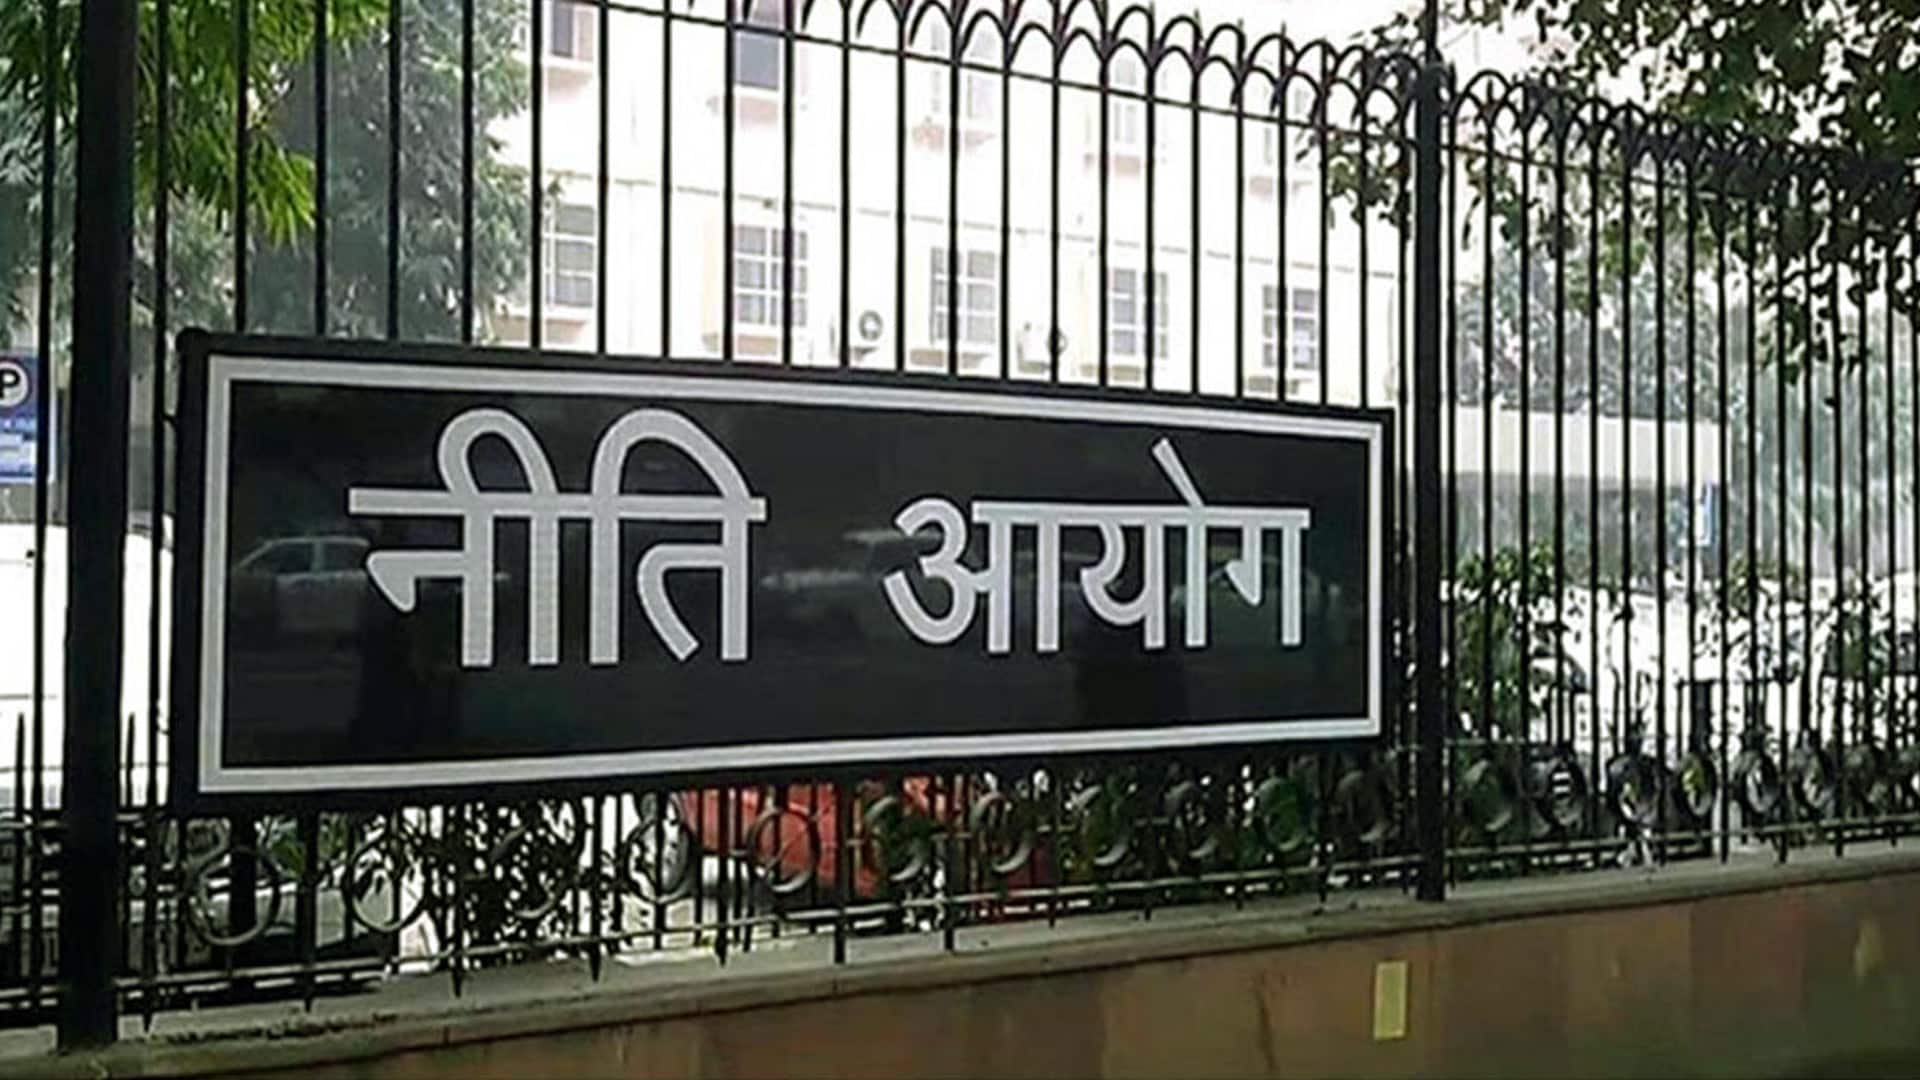 Efficient distribution sector essential for improving ease of doing business: Niti Aayog VC